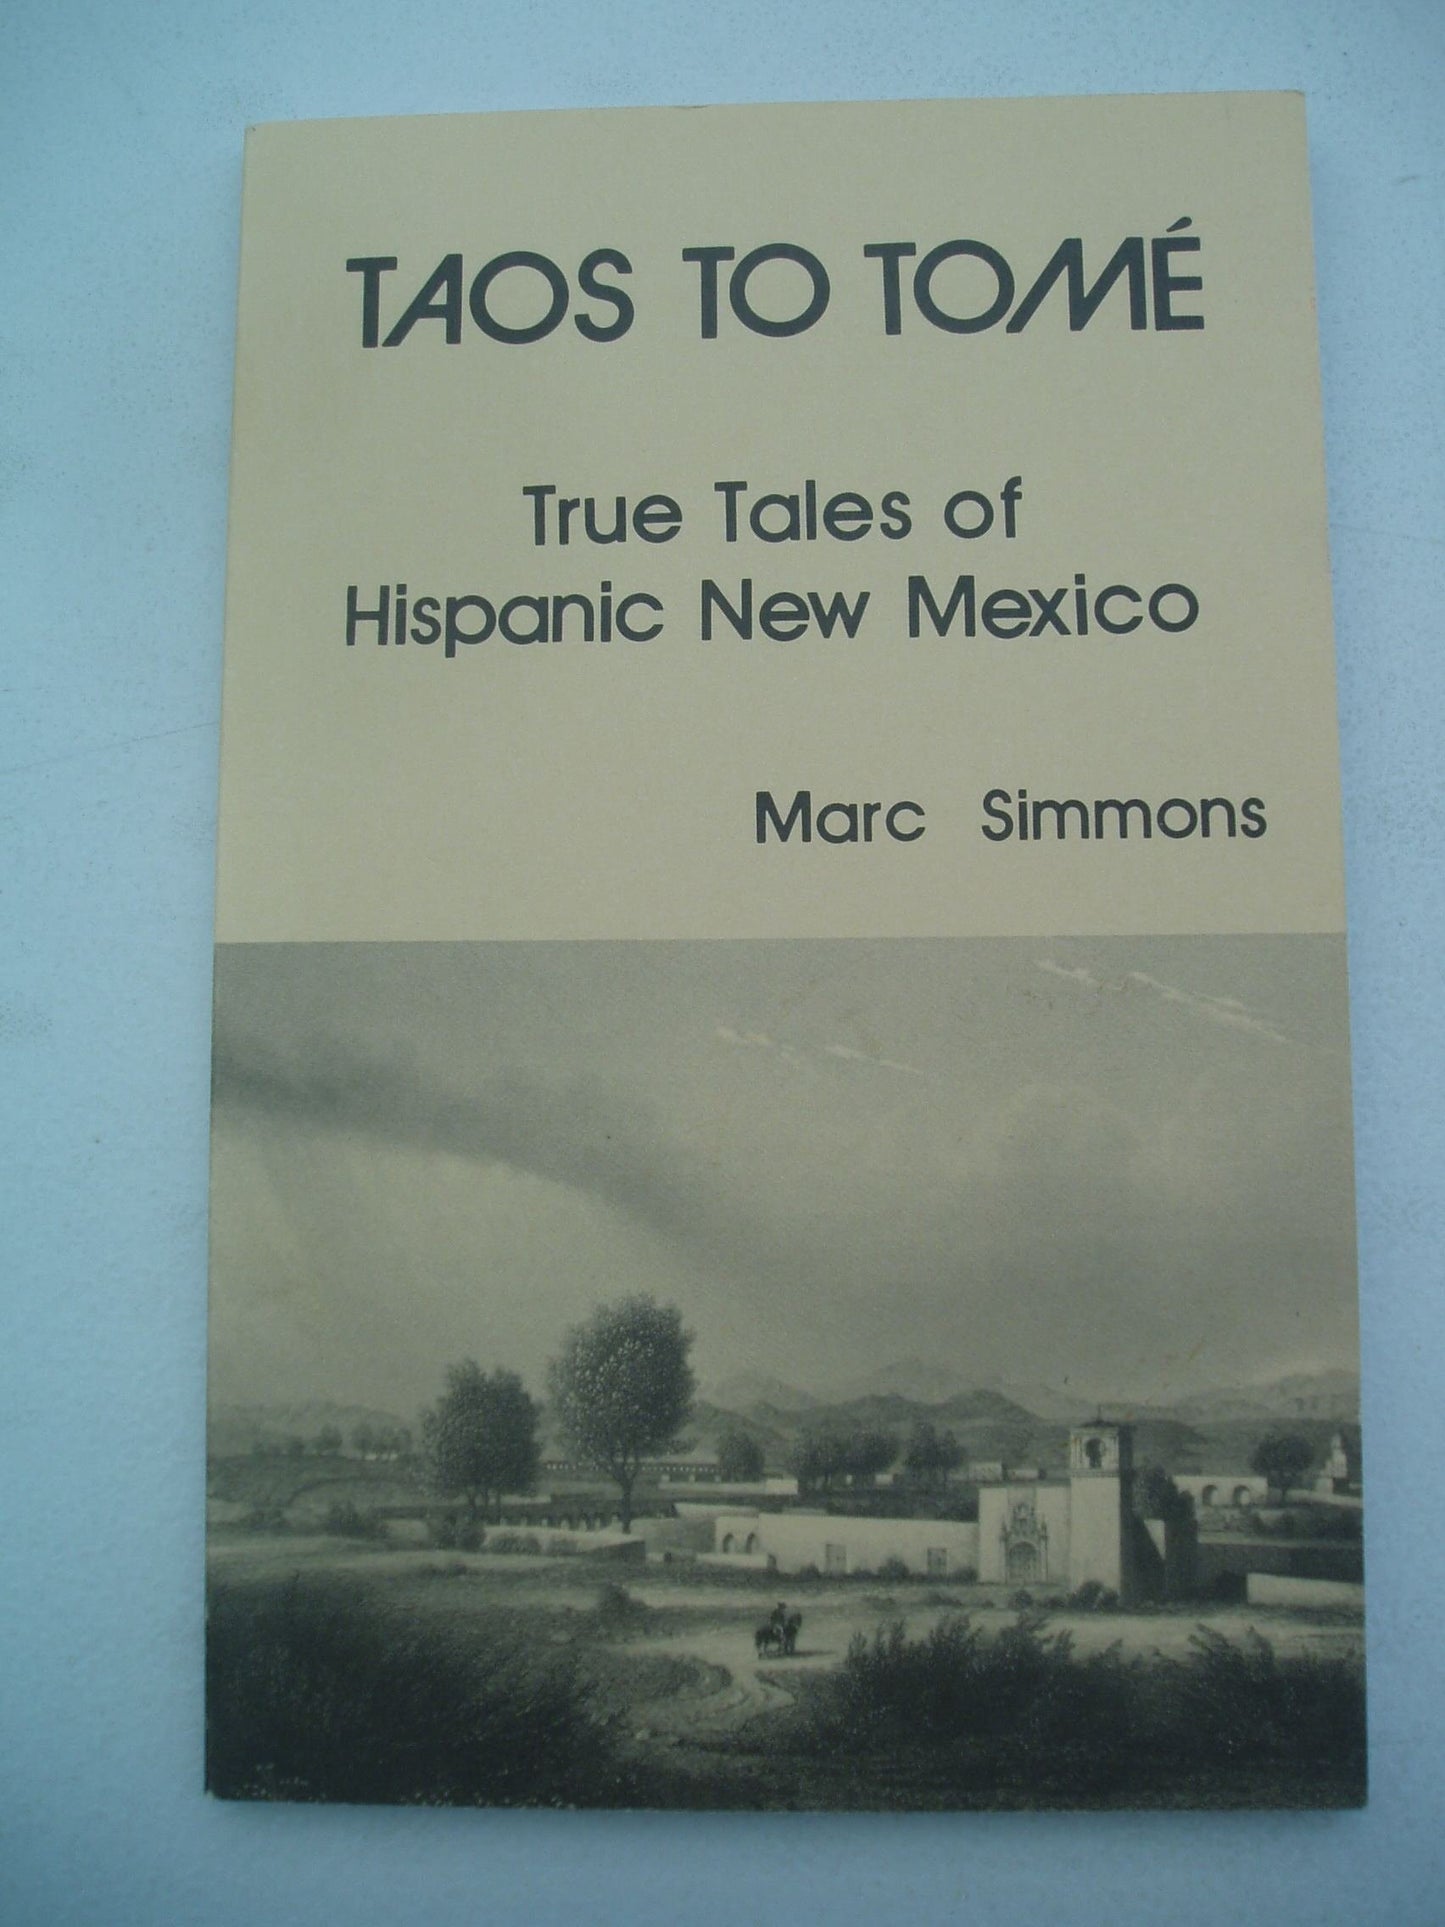 Taos to Tome: True Tales of Hispanic New Mexico